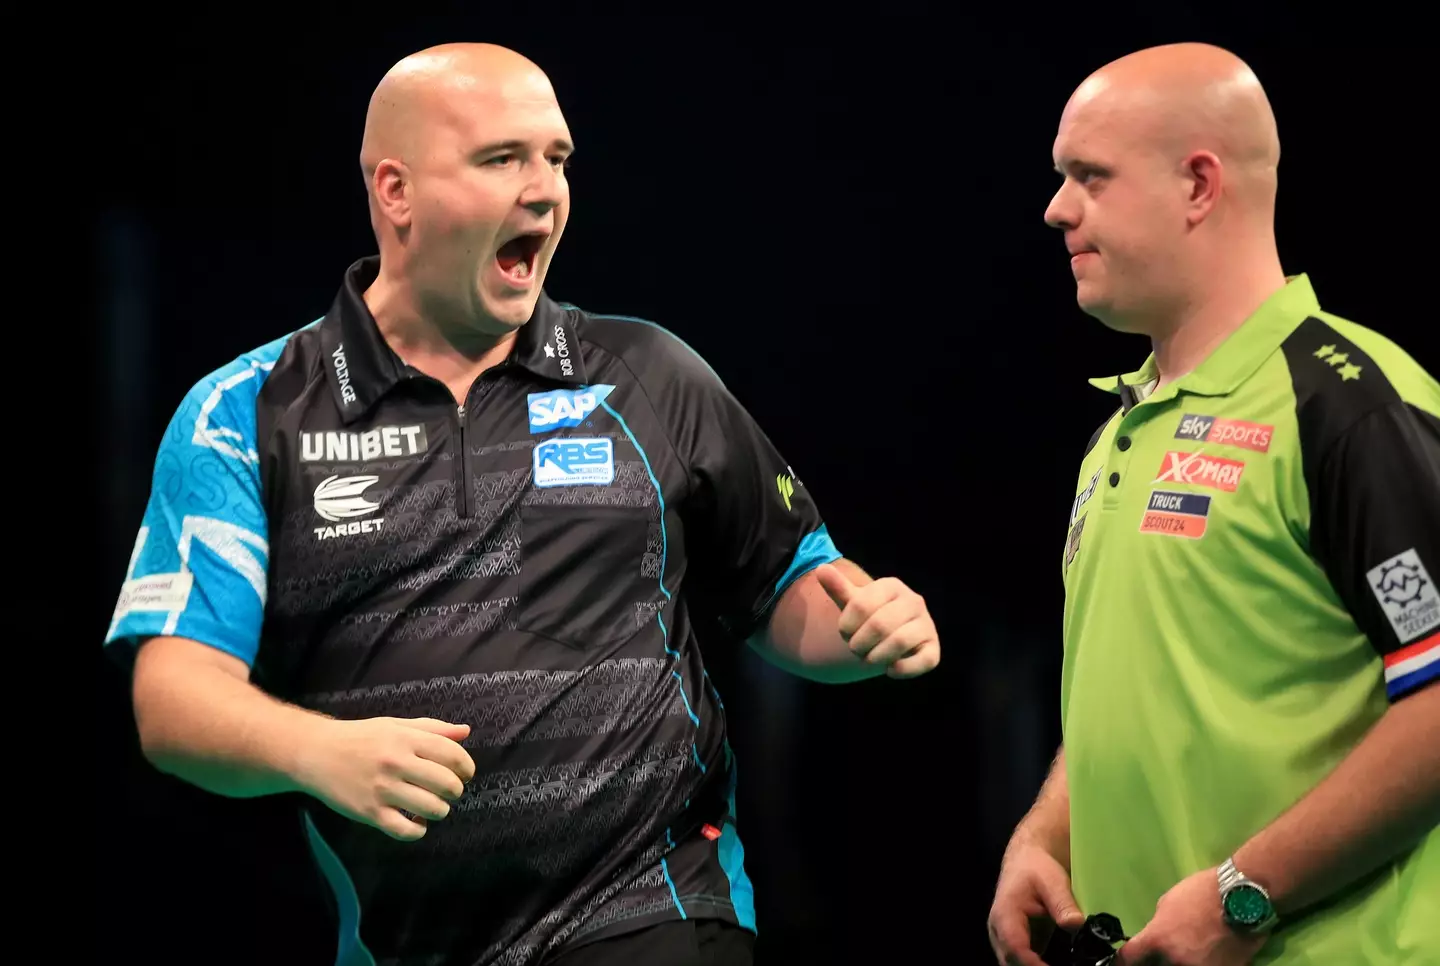 Cross wouldn't sign the green shirt associated with rival Van Gerwen. Image: Alamy